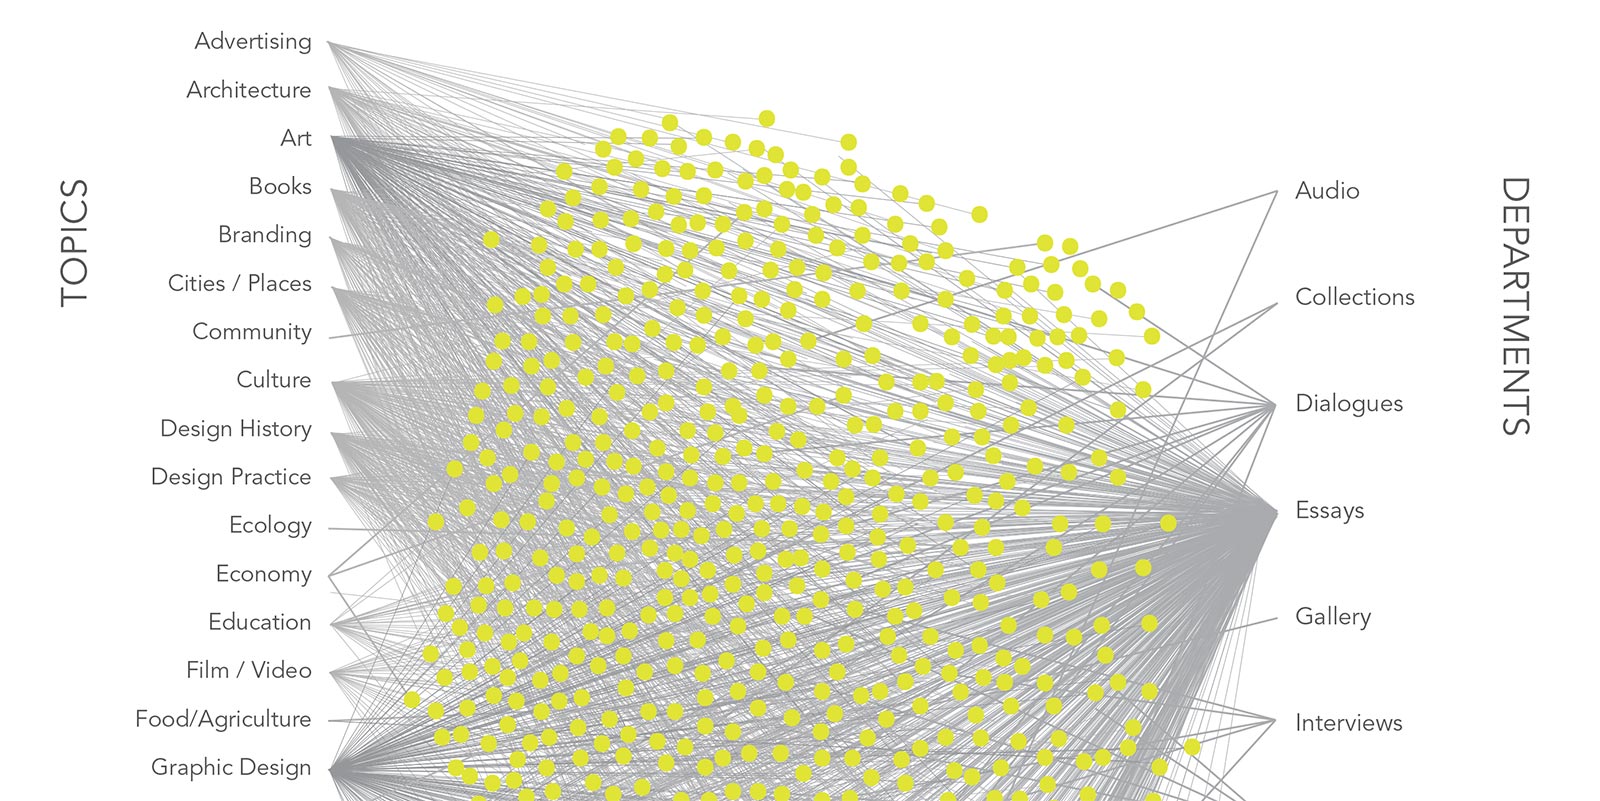 A close-up of the poster details, showing a cluster of chartreuse dots and hundreds of lines pointing to them from columns of keywords on the left and right.